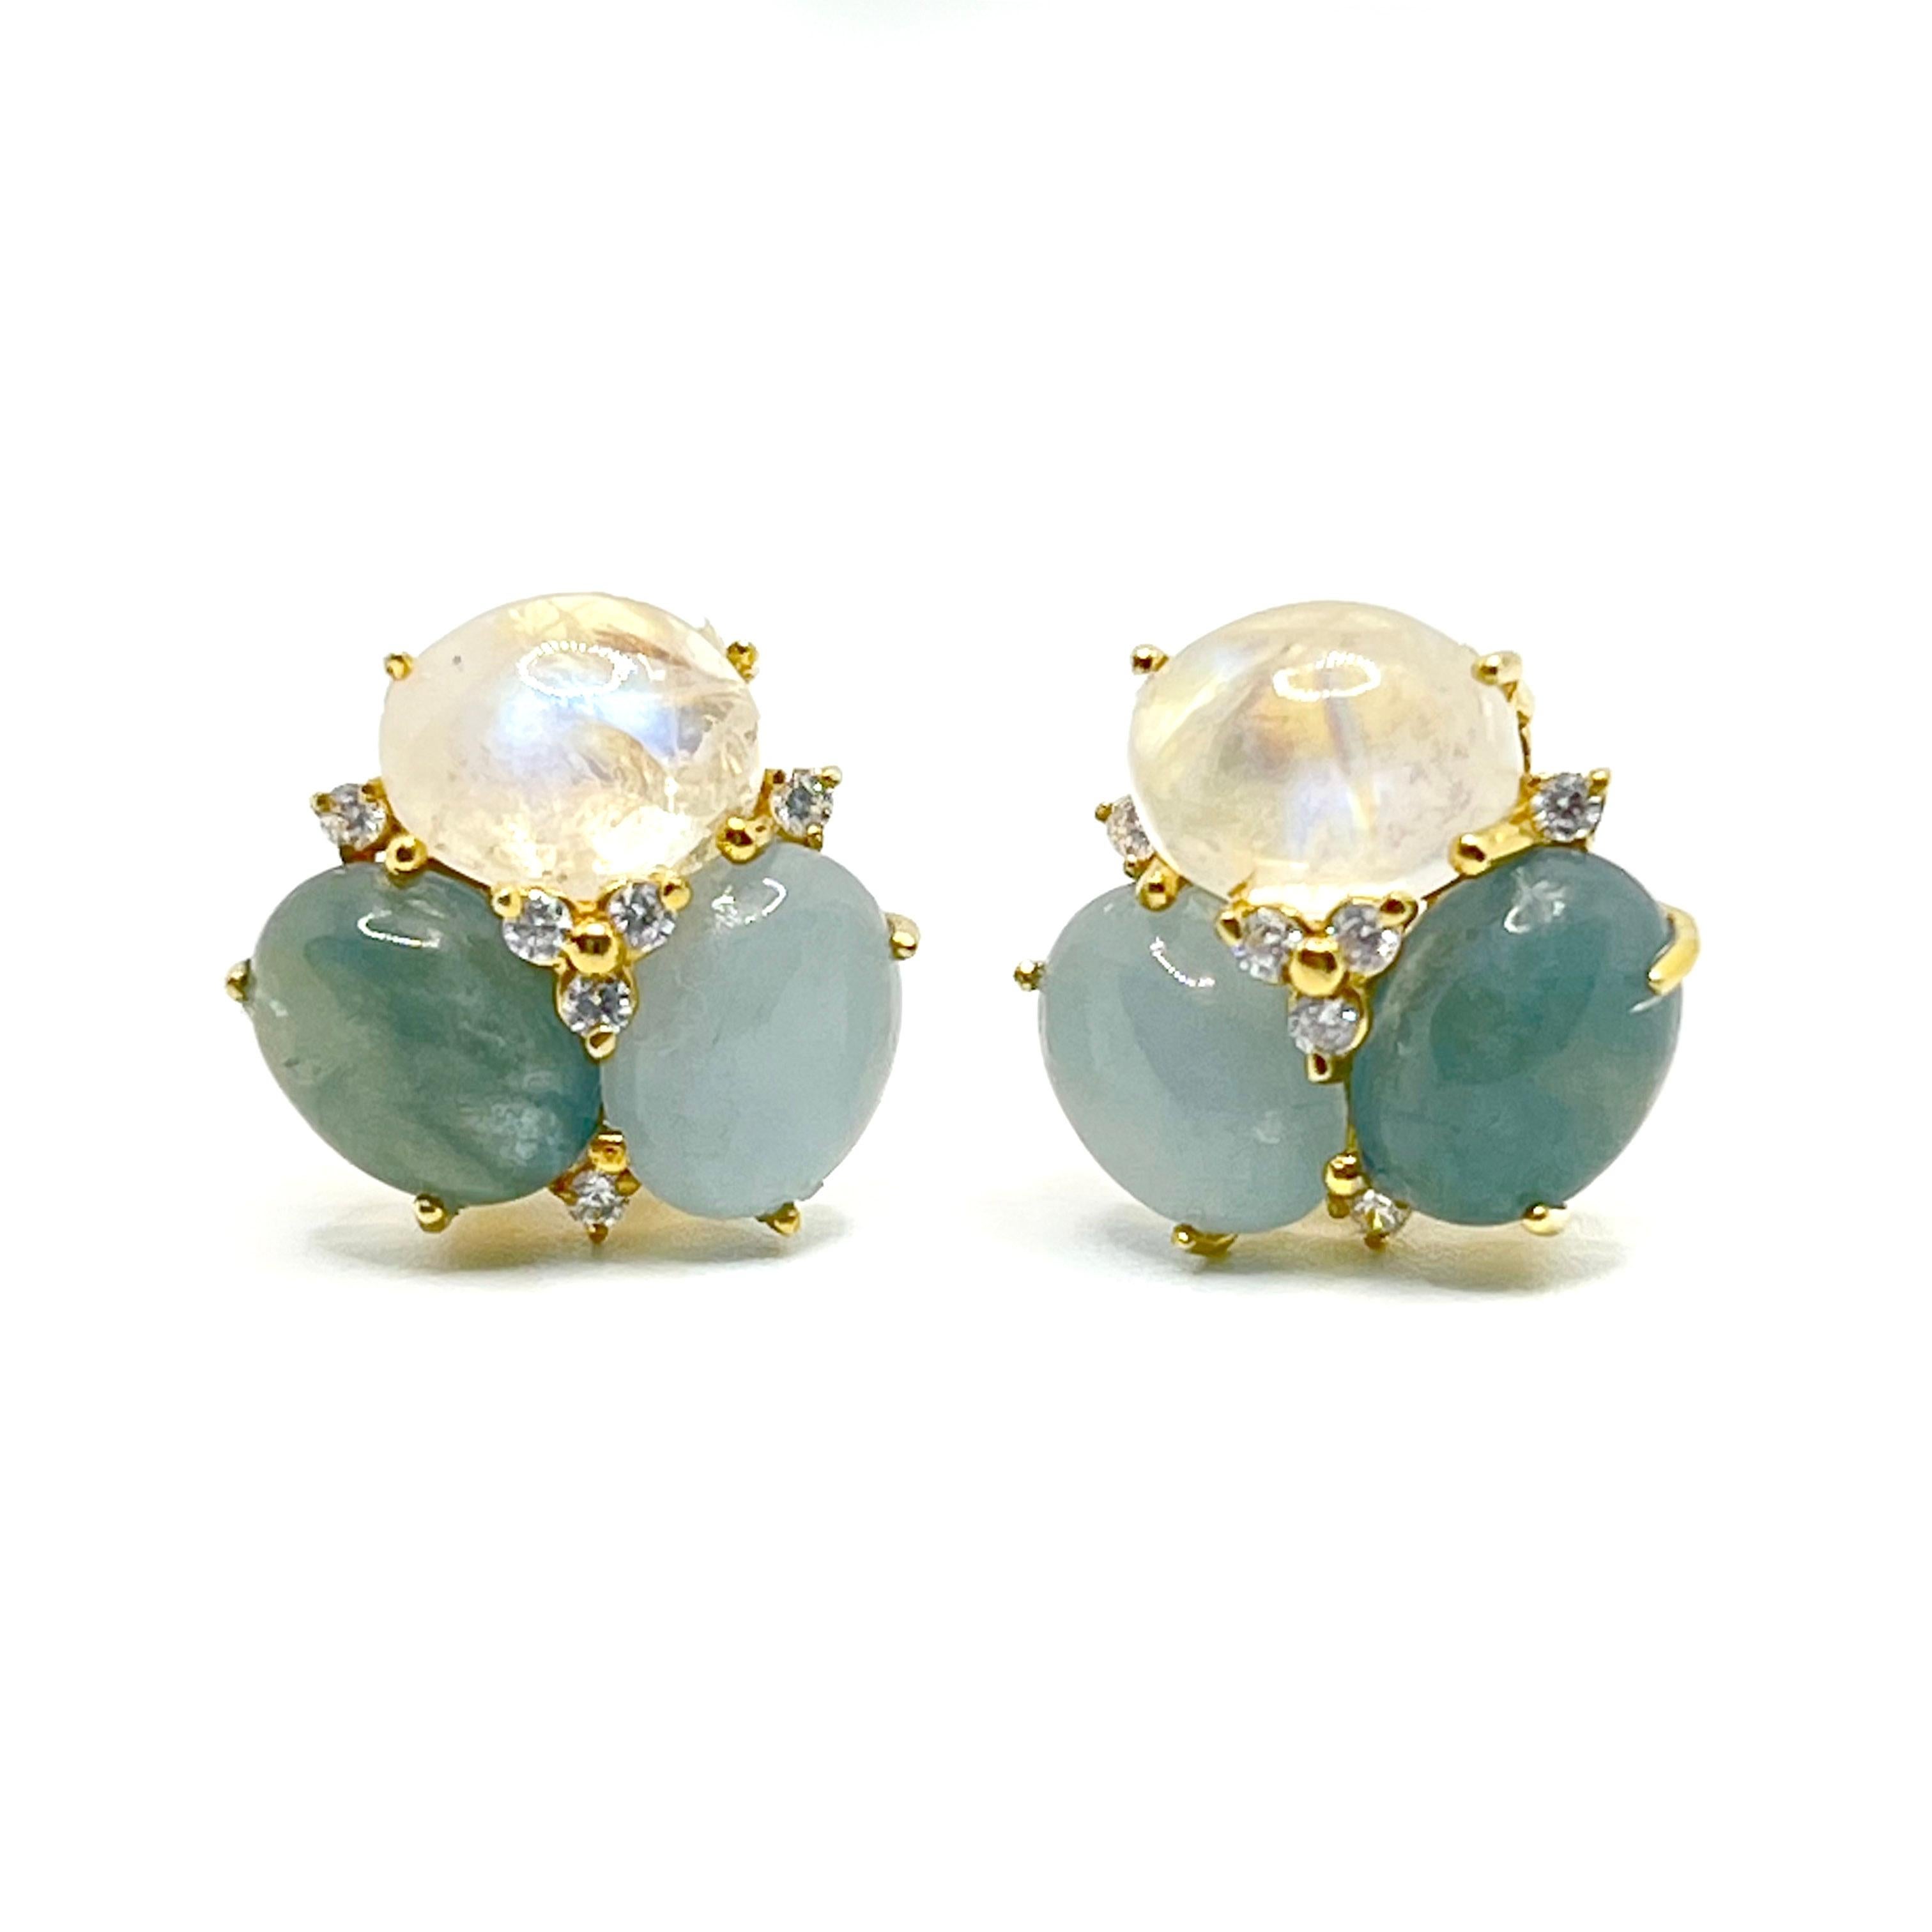 These stunning pair of earrings feature sets of oval cabochon-cut aquamarine, green beryl, and rainbow moonstone, adorned with round simulated diamonds, handset in 18k yellow gold vermeil over sterling silver. The combination of these three color